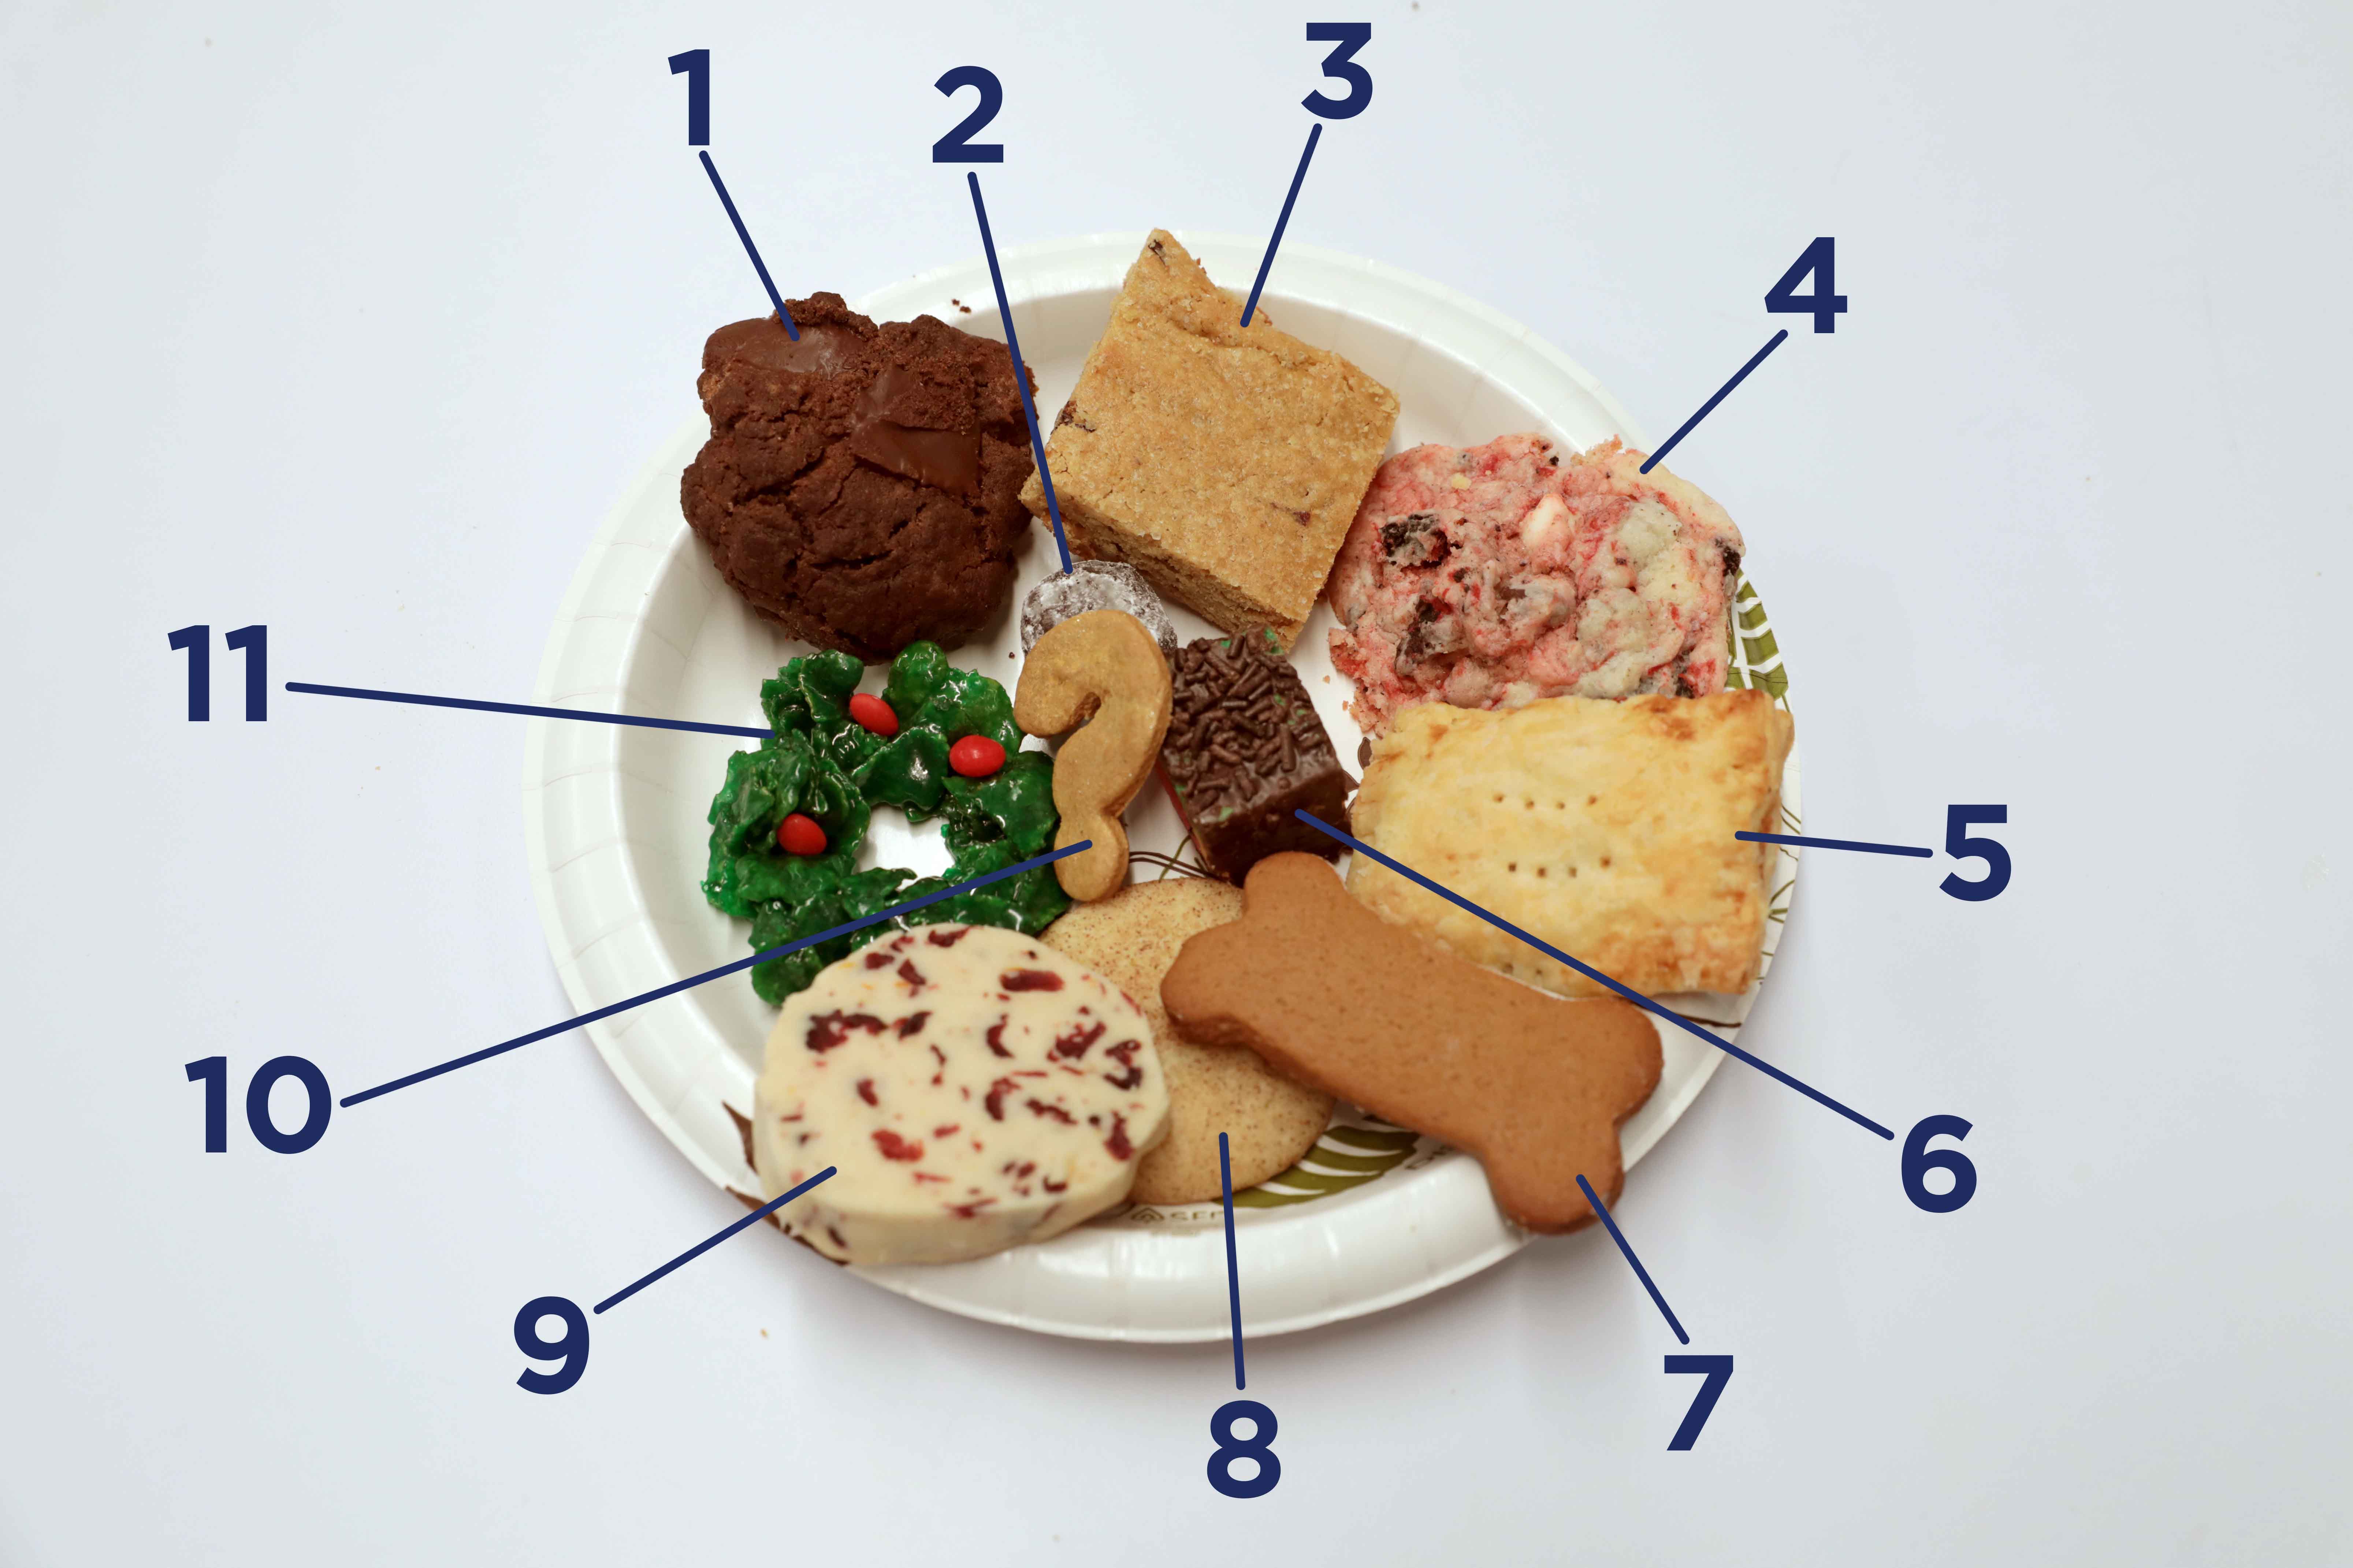 A plate of cookies annotated with numbers 1-11